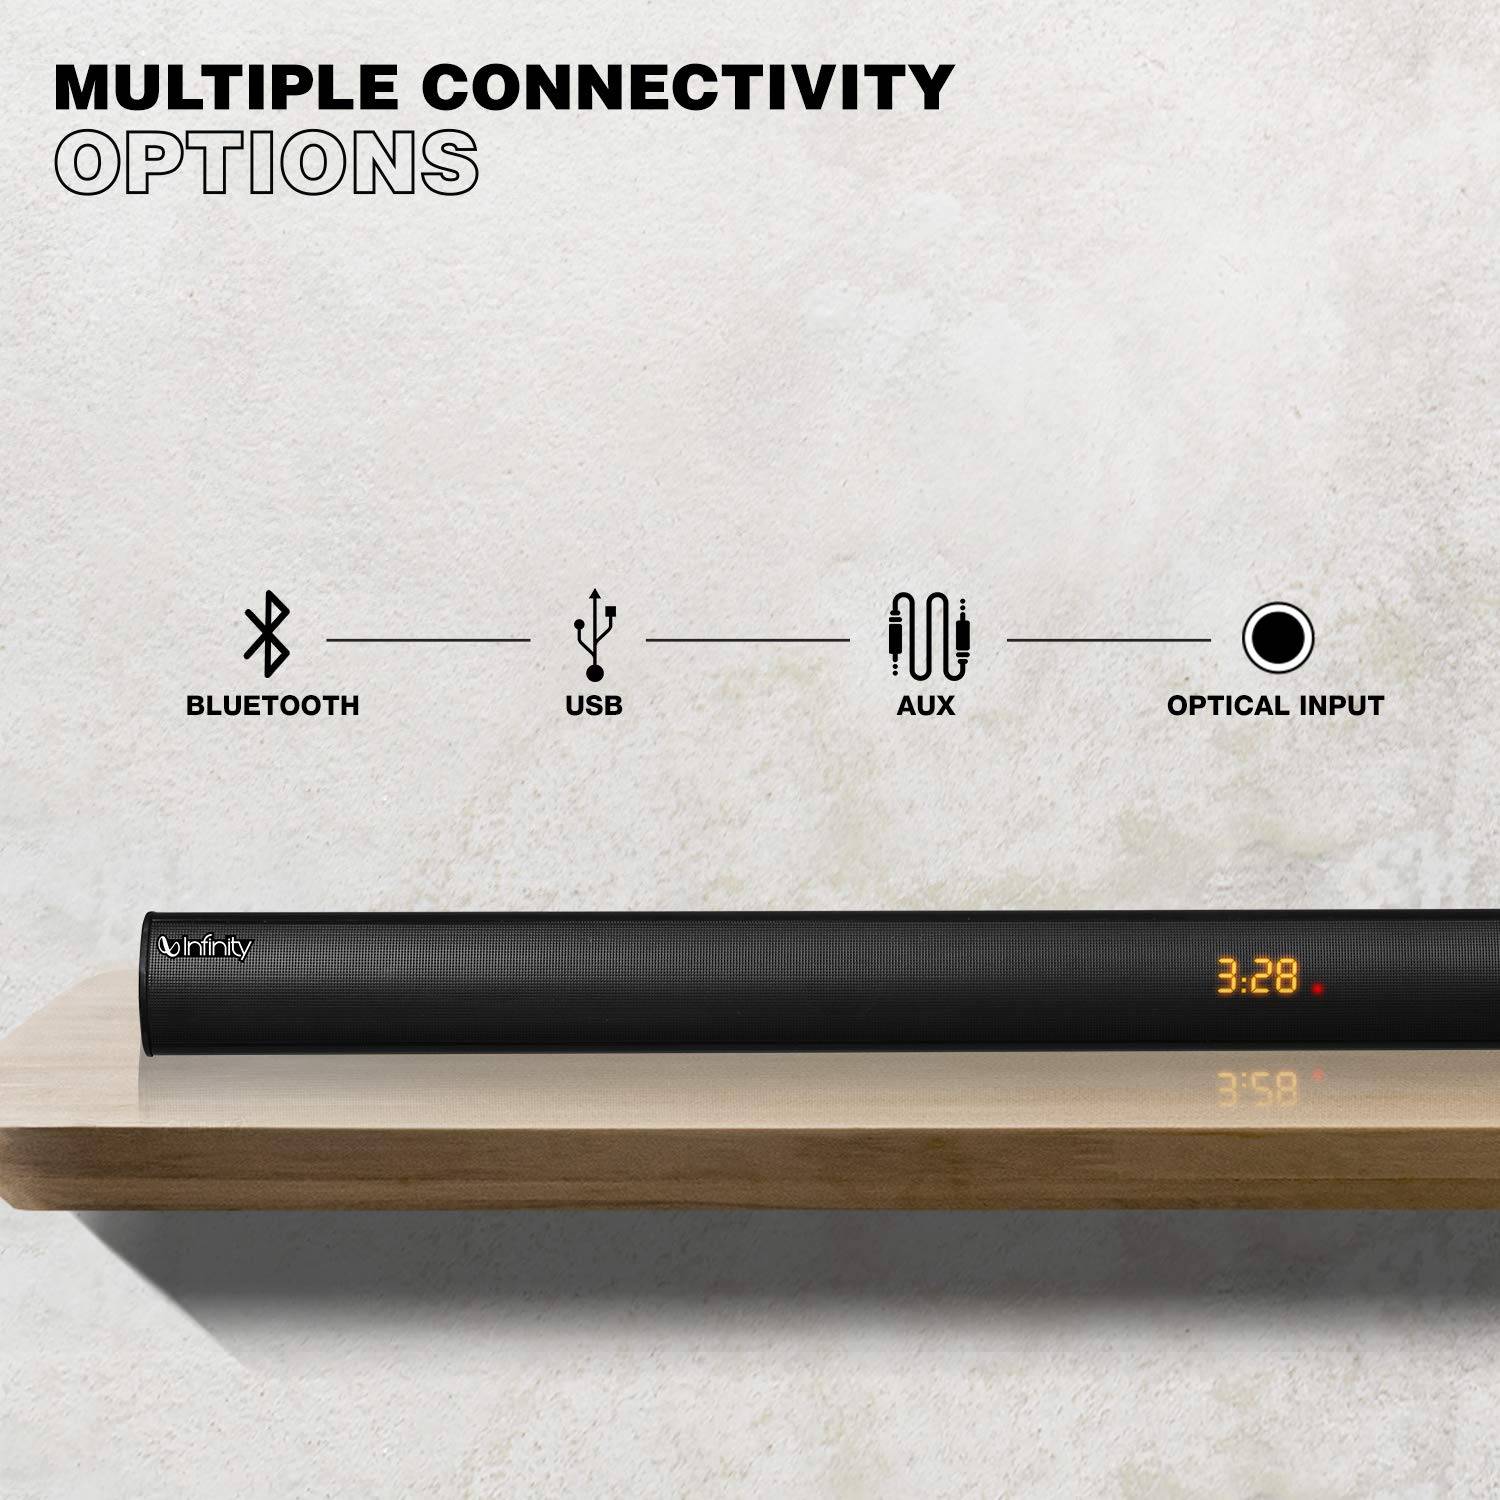 MULTIPLE CONNECTIVITY